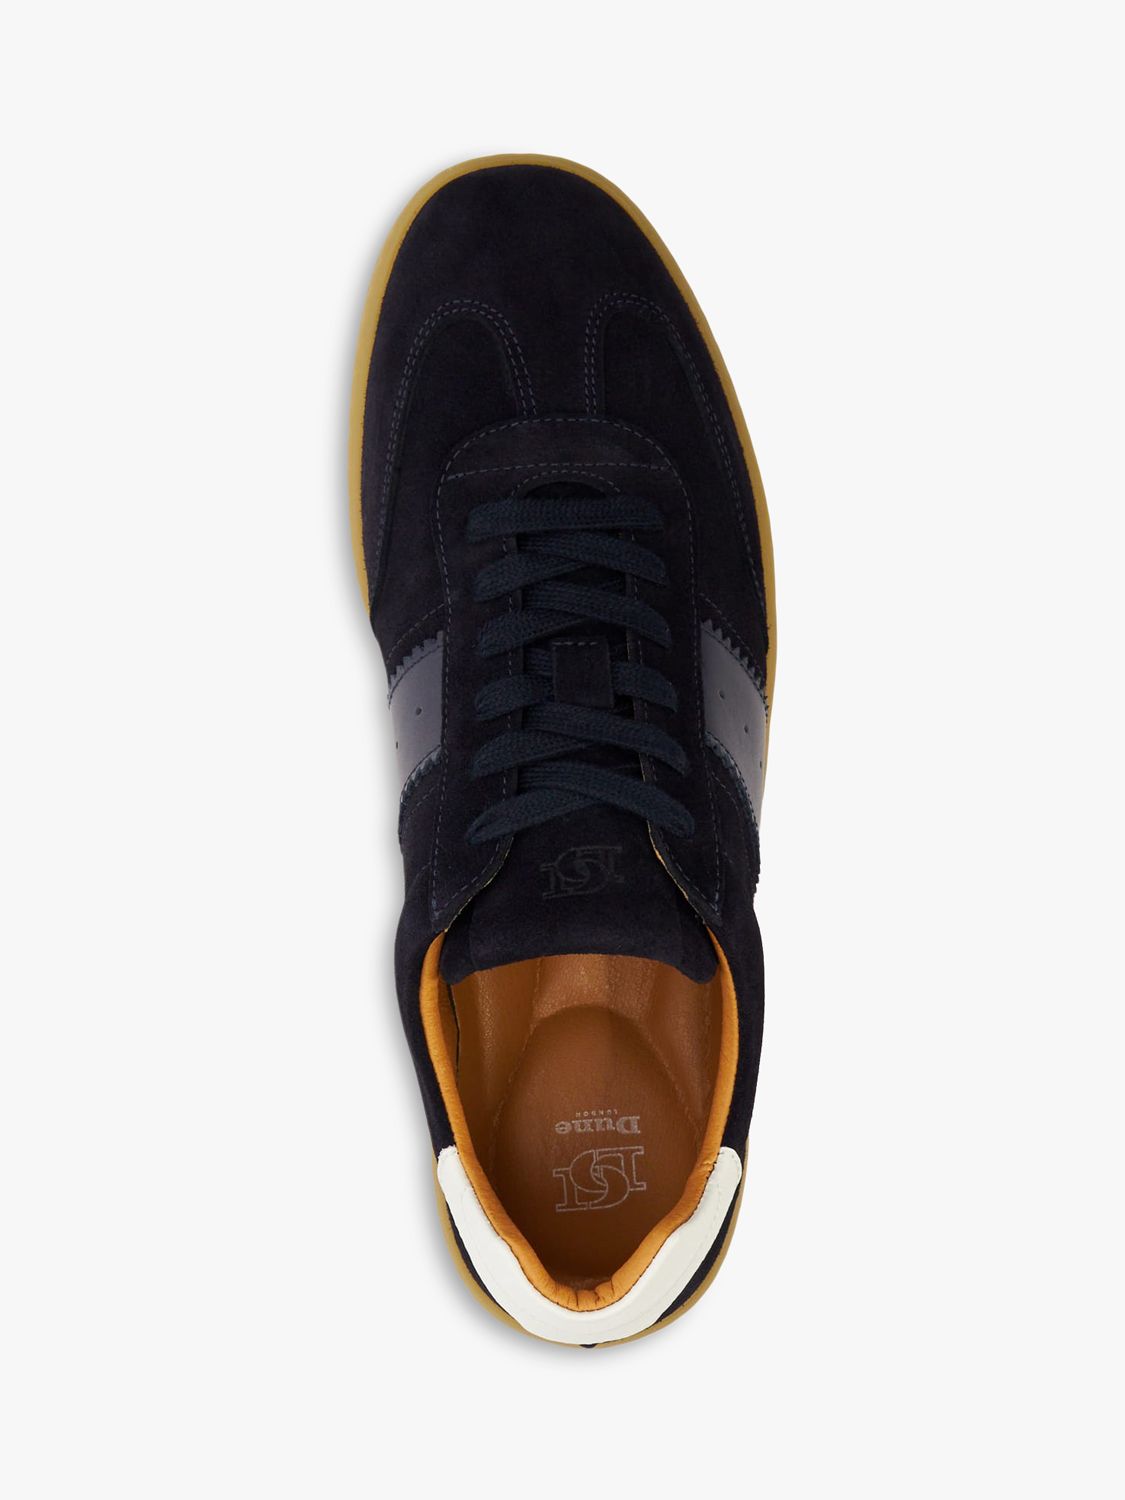 Dune Torress Suede Retro Trainers, Navy at John Lewis & Partners